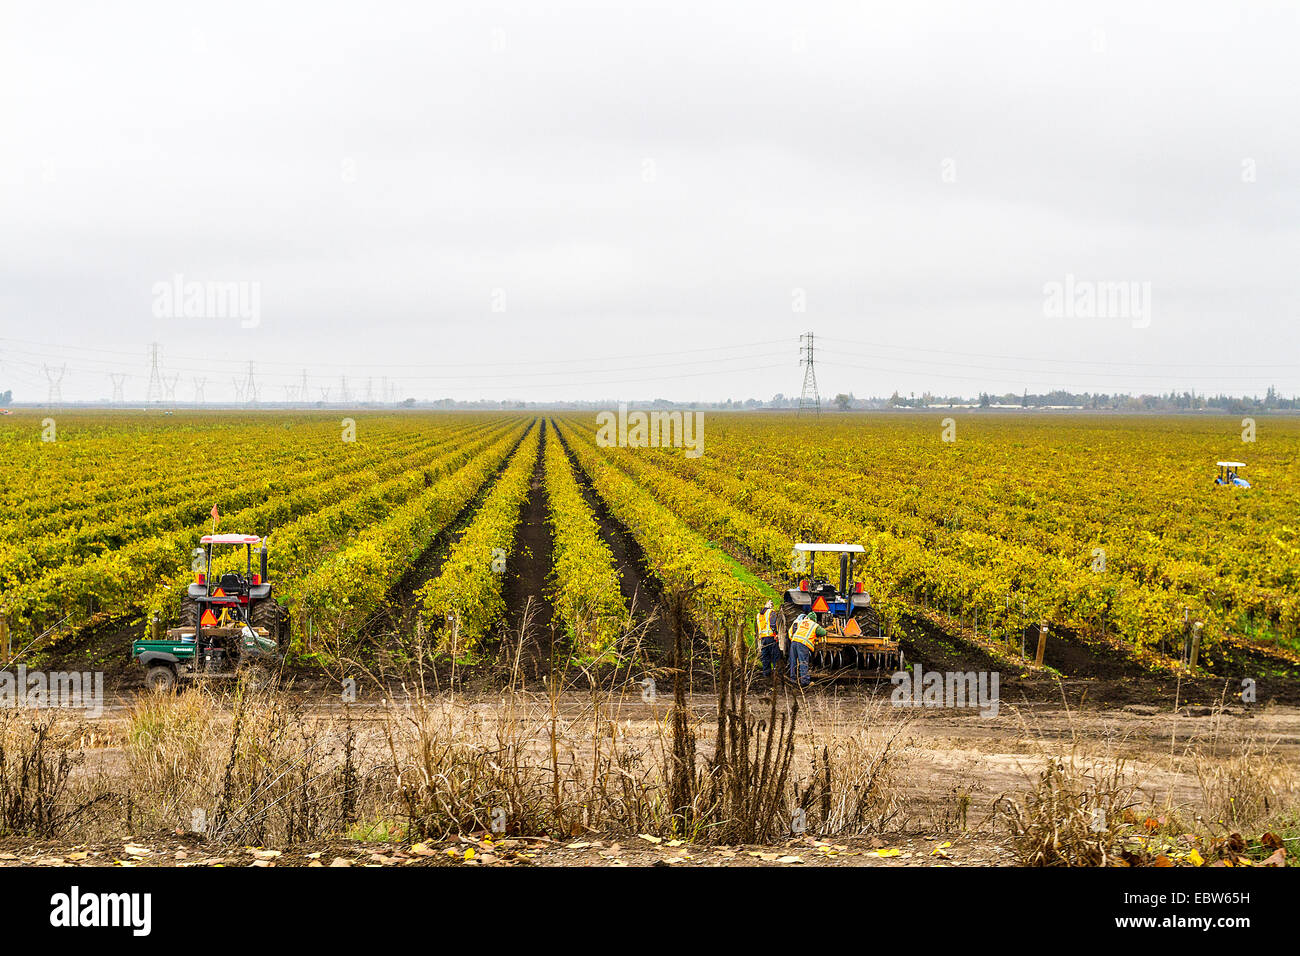 Workers in a vineyard in Stockton Lodi area of California in the Fall of 2014 Stock Photo